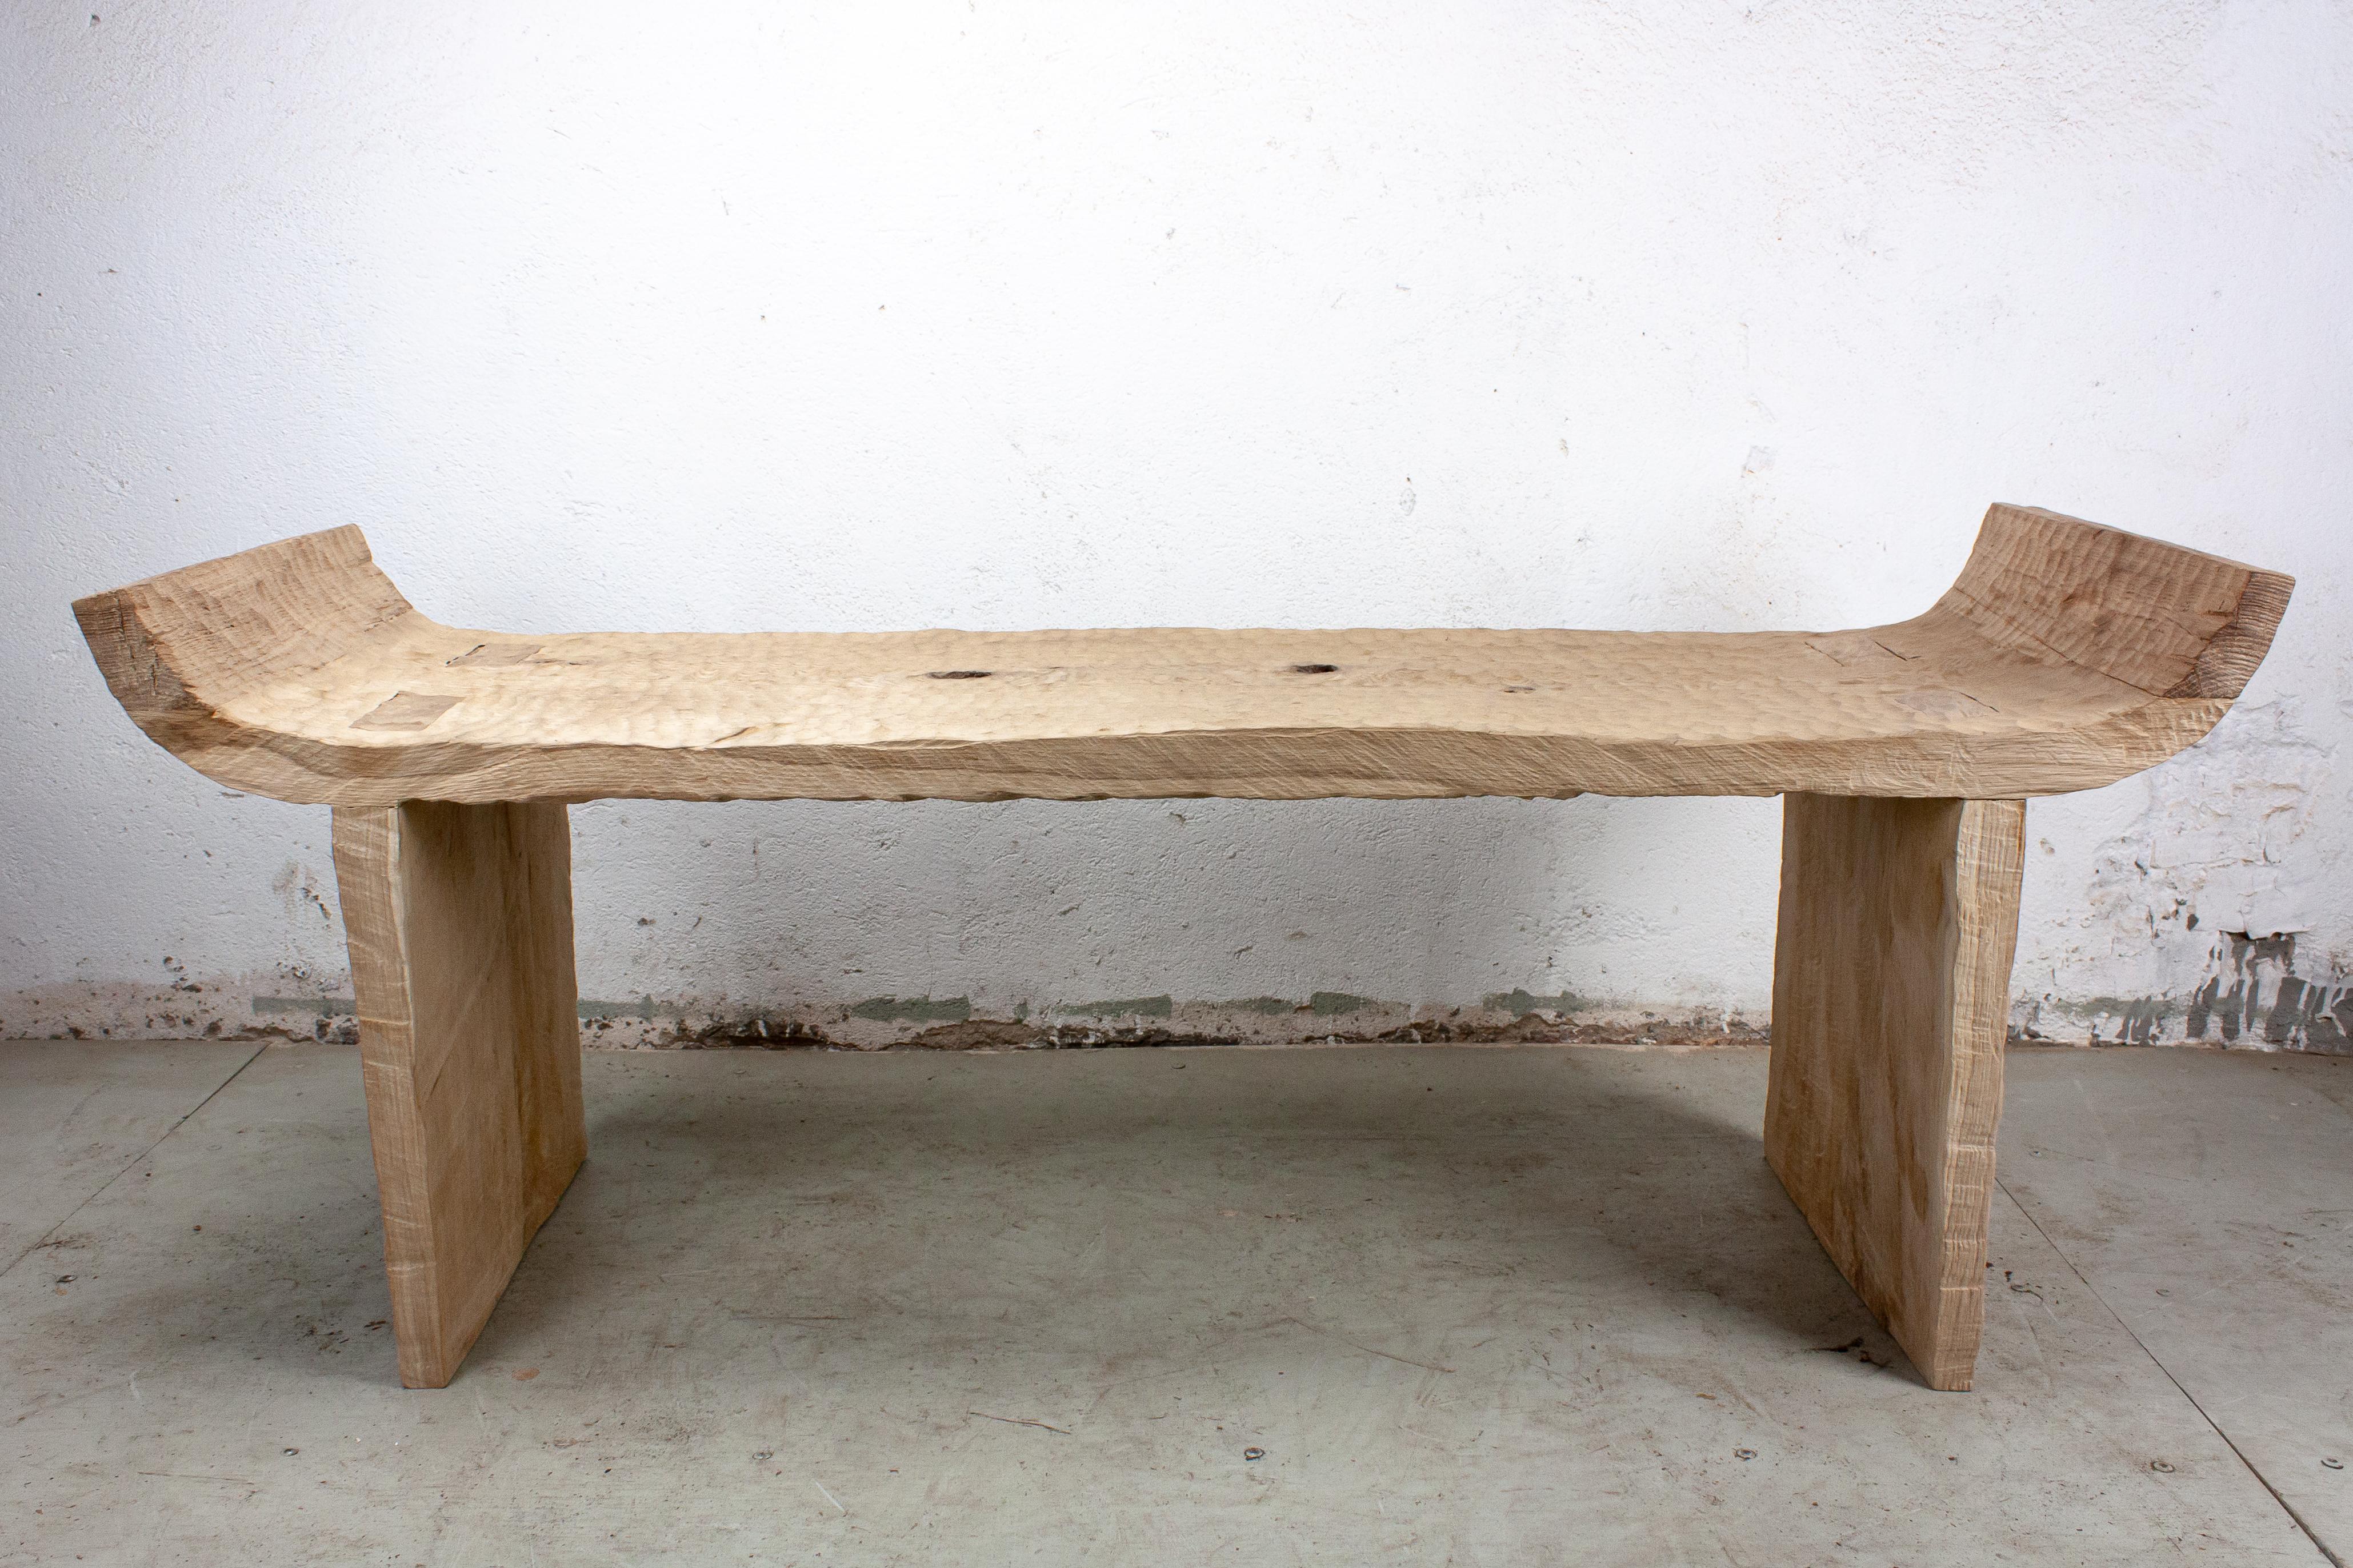 Bench
Sculpted wood (solid oak)
Finish: hammered, light

[Suitable for outdoor use]

SÓHA design studio conceives and produces furniture design and decorative objects in solid oak in an authentic style. Inspiration to create all these items comes